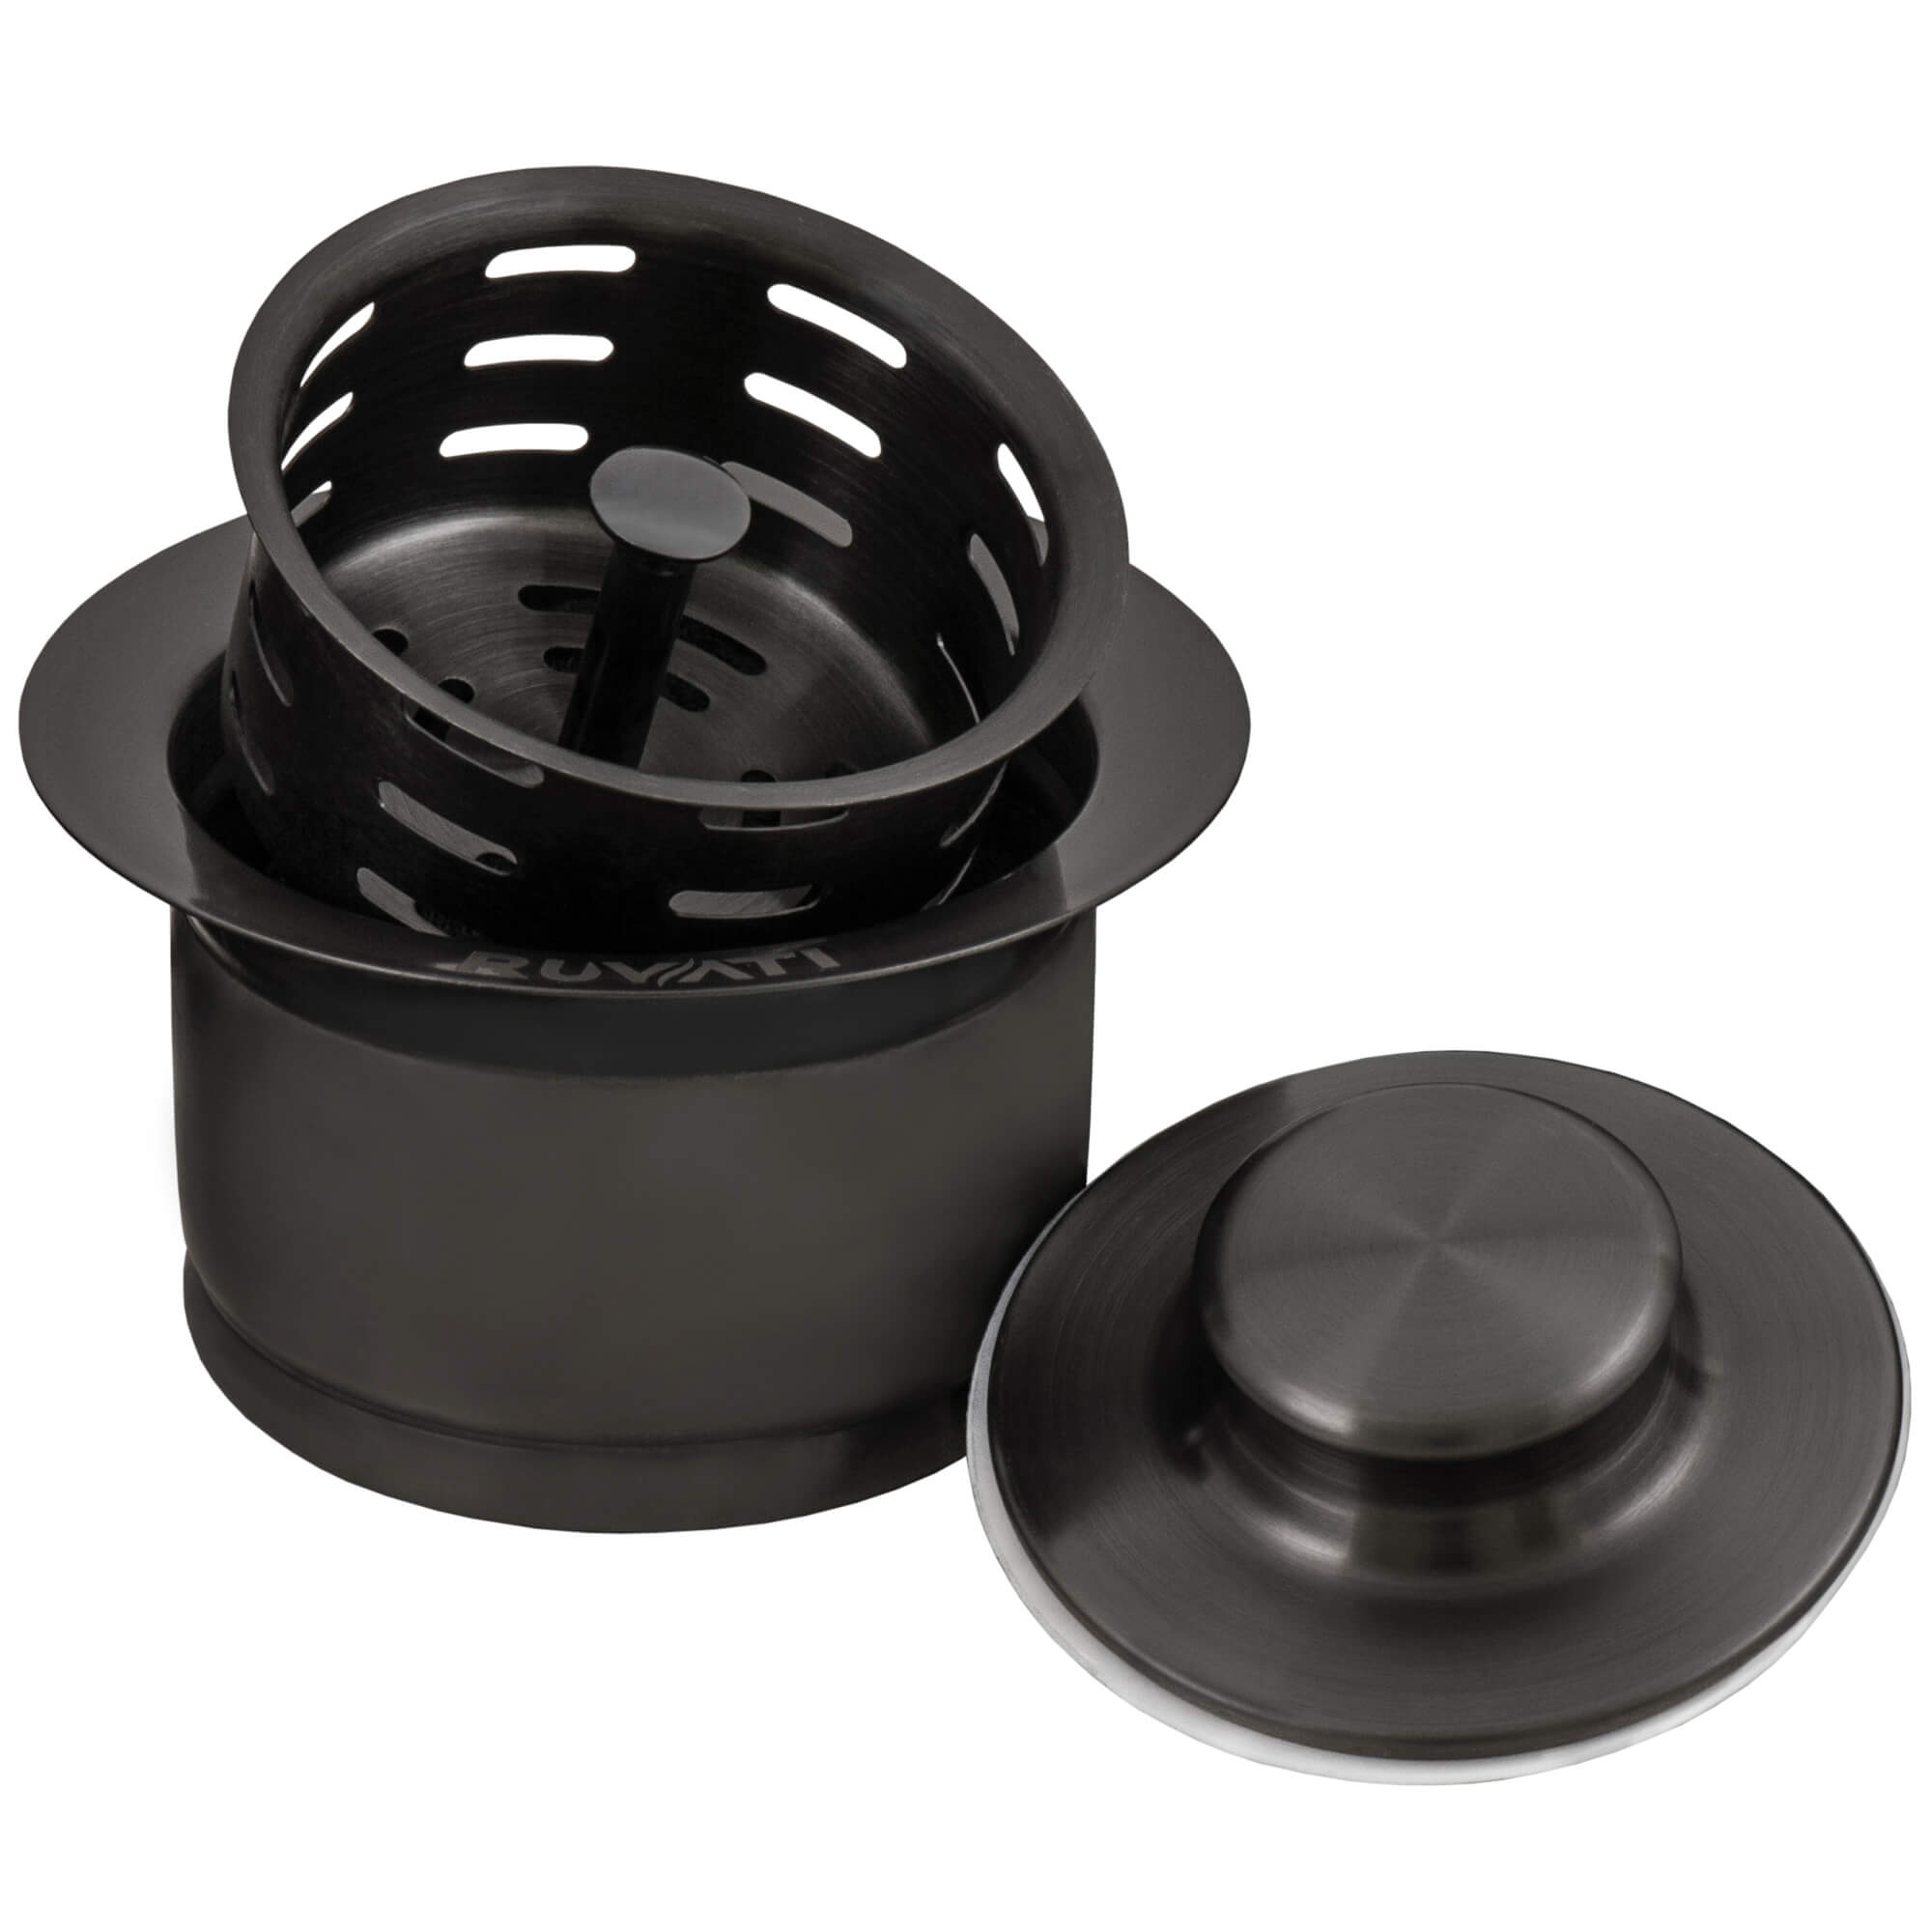 Ruvati Extended Garbage Disposal Flange with Deep Basket and